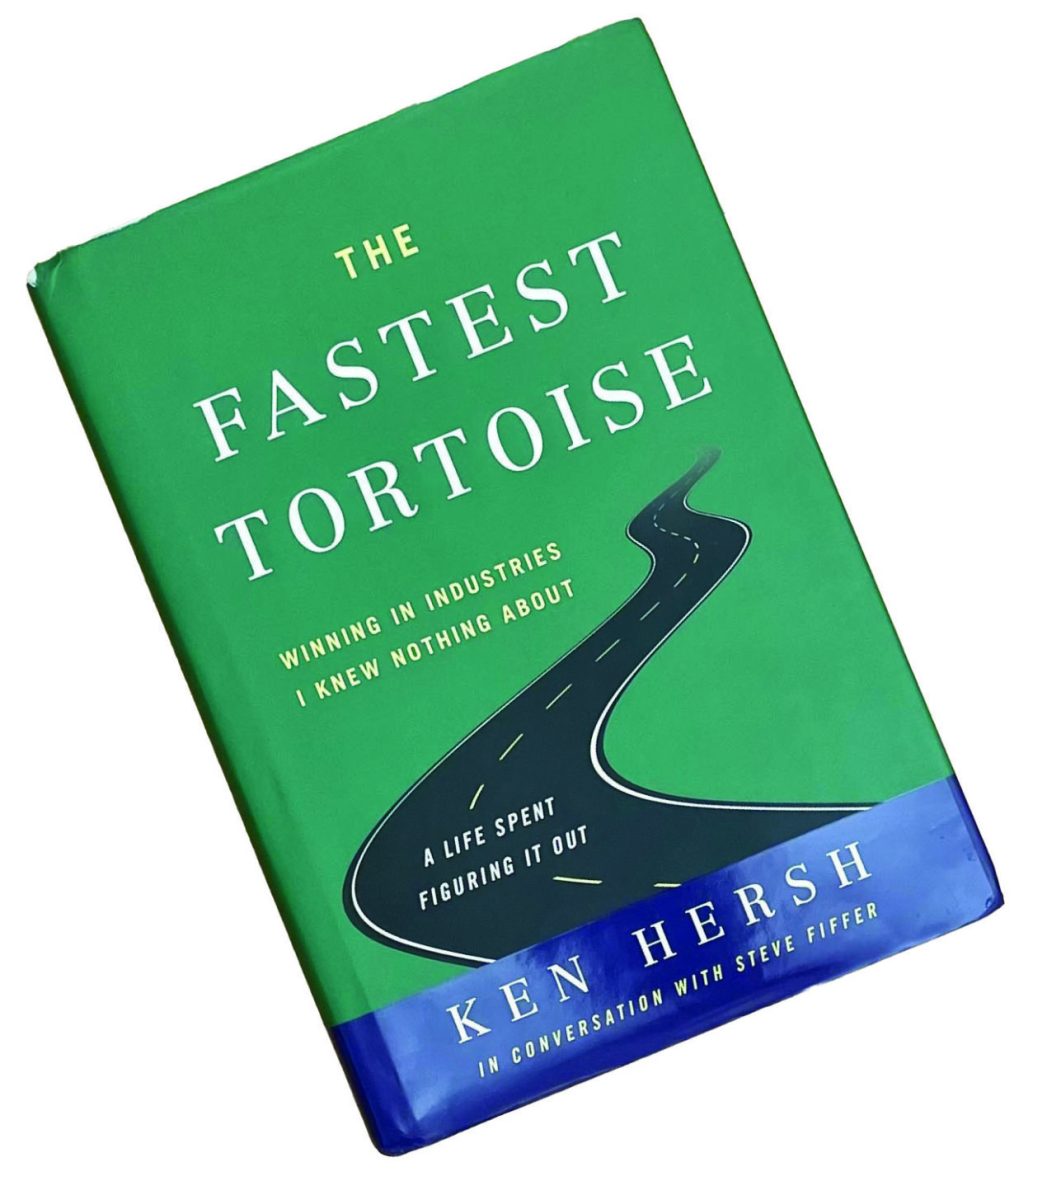 Find Ken Hersh’s newest book, The Fastest Tortoise: Winning in Industries I Knew Nothing About — A Life Spent Figuring It Out, online and at book stores near you. The memoir, published in a Q&A format co-authored by Steve Fiffer, was released on March 23. This is Hersh’s first book. 